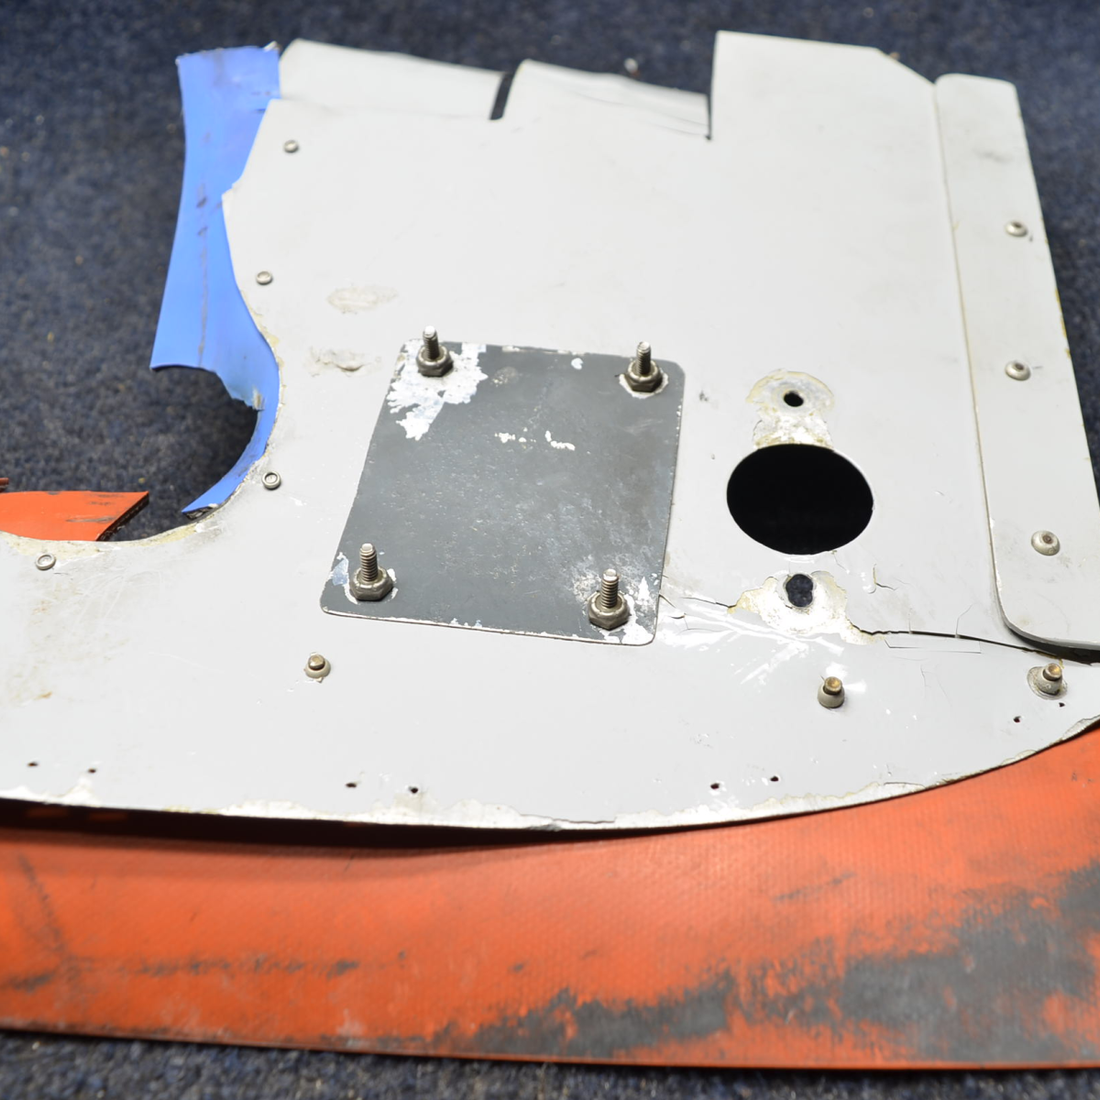 Used aircraft parts for sale, 502036-2 PIPER- CESSNA-BEECH- MOONEY VARIOS GRUMMAN LH REAR SIDE BAFFLE